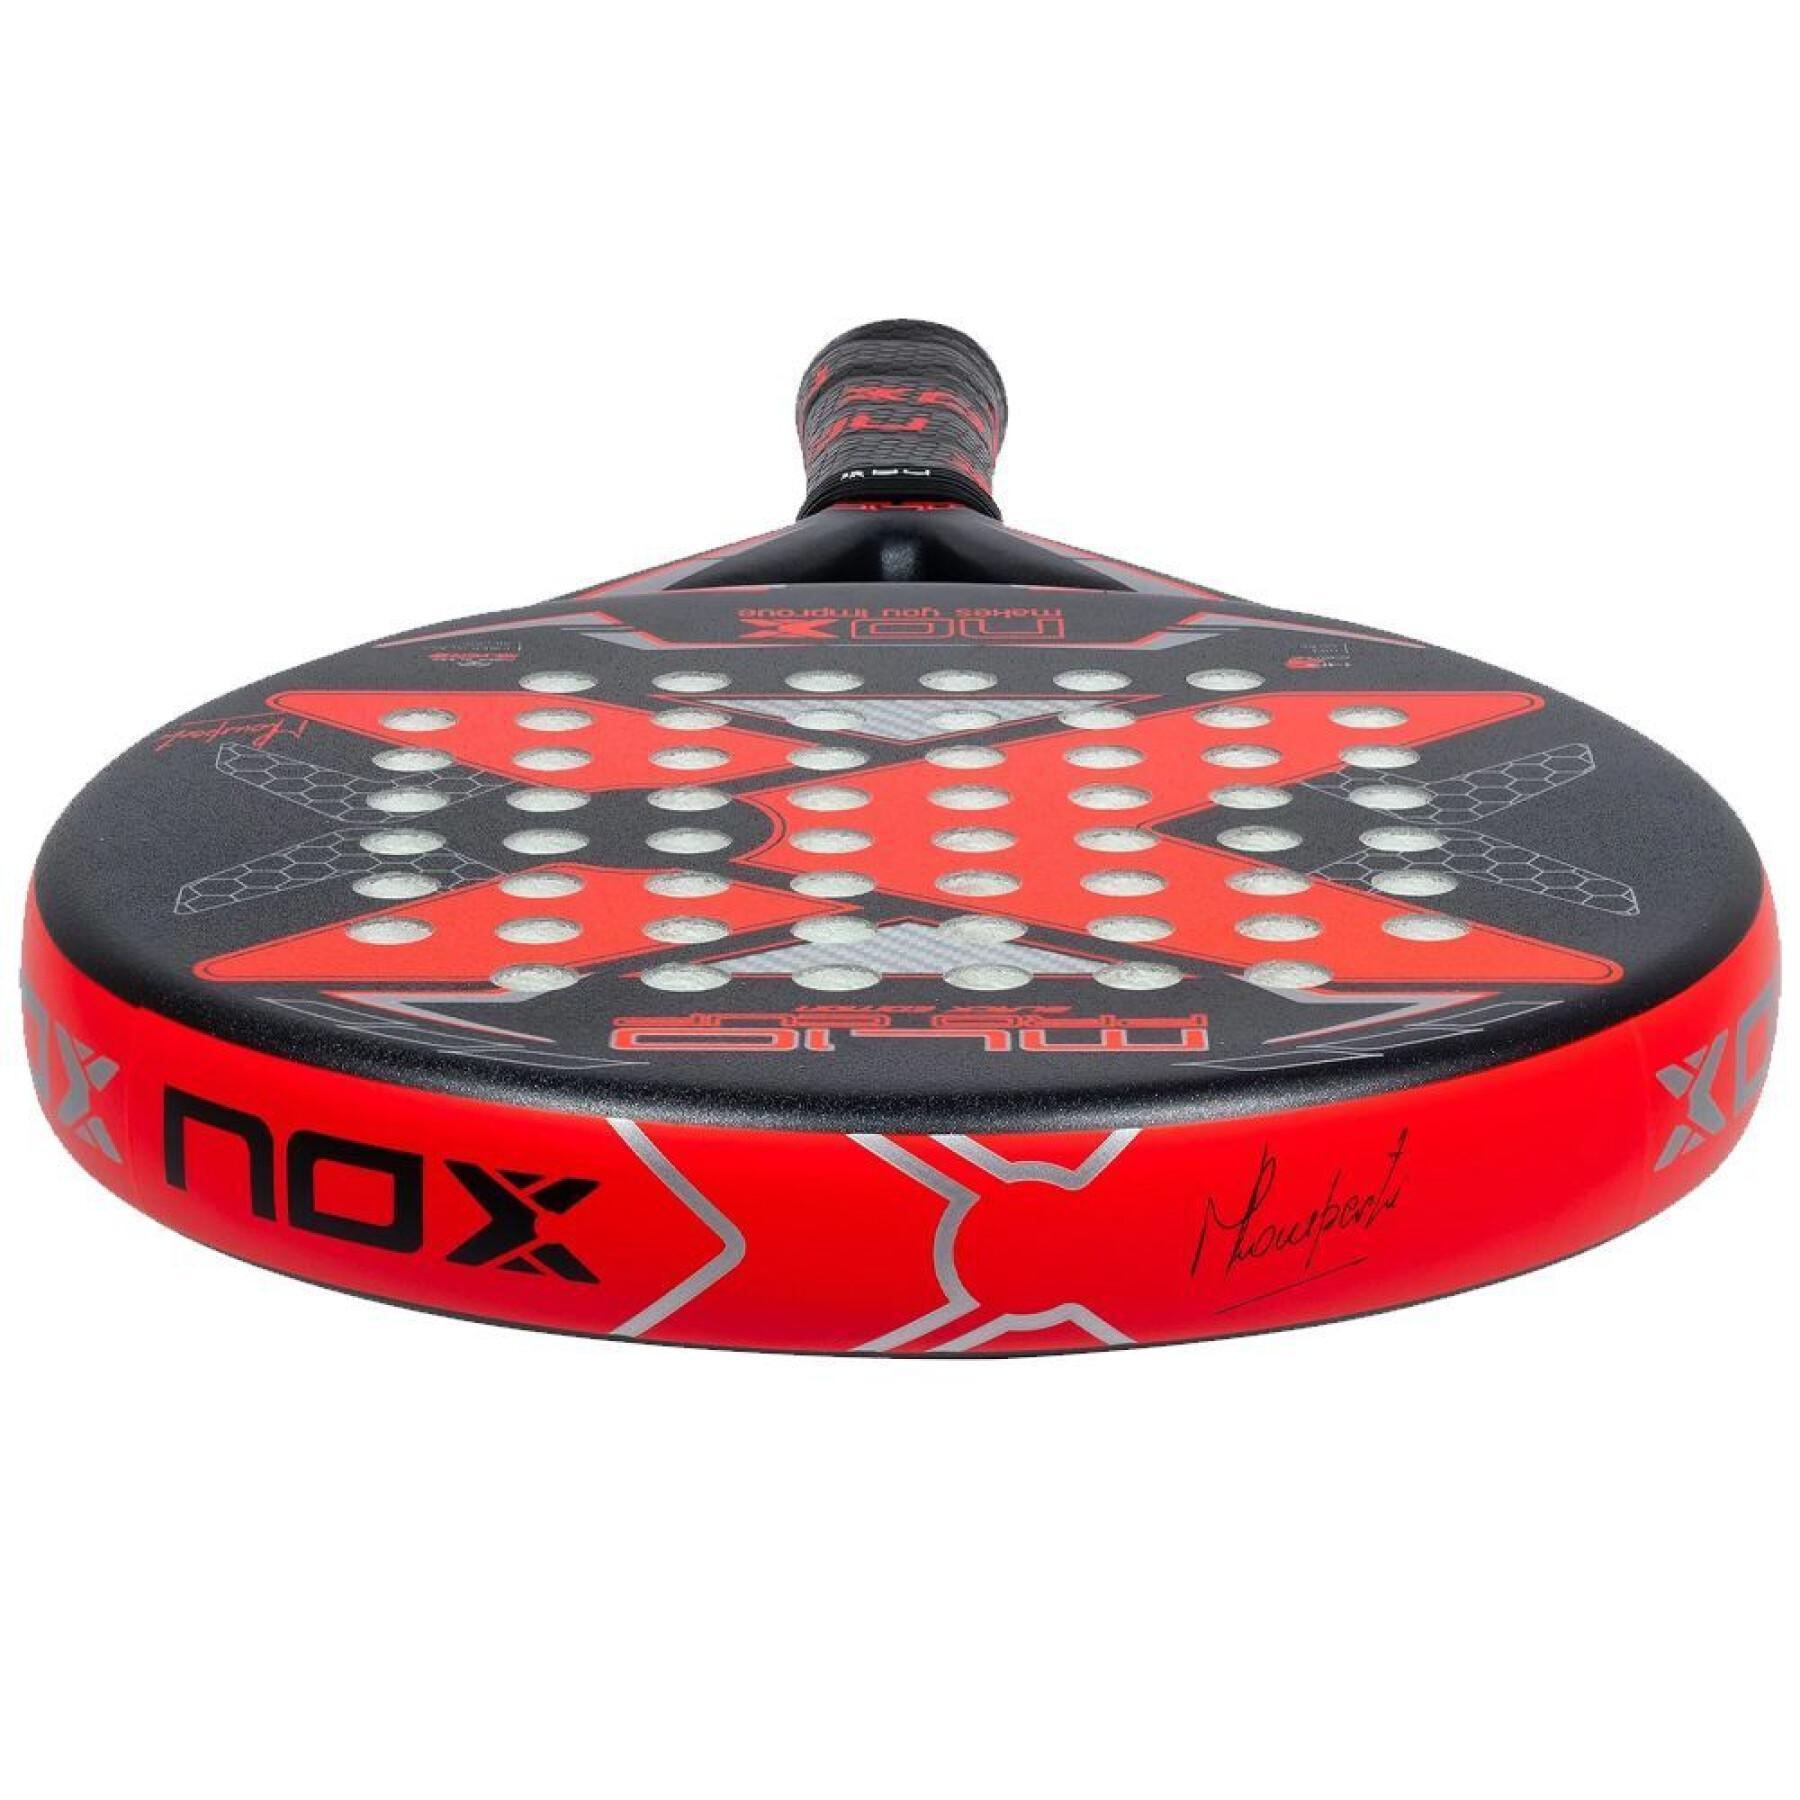 Paddelracket Nox ML10 Pro Cup Rough Surface Edition